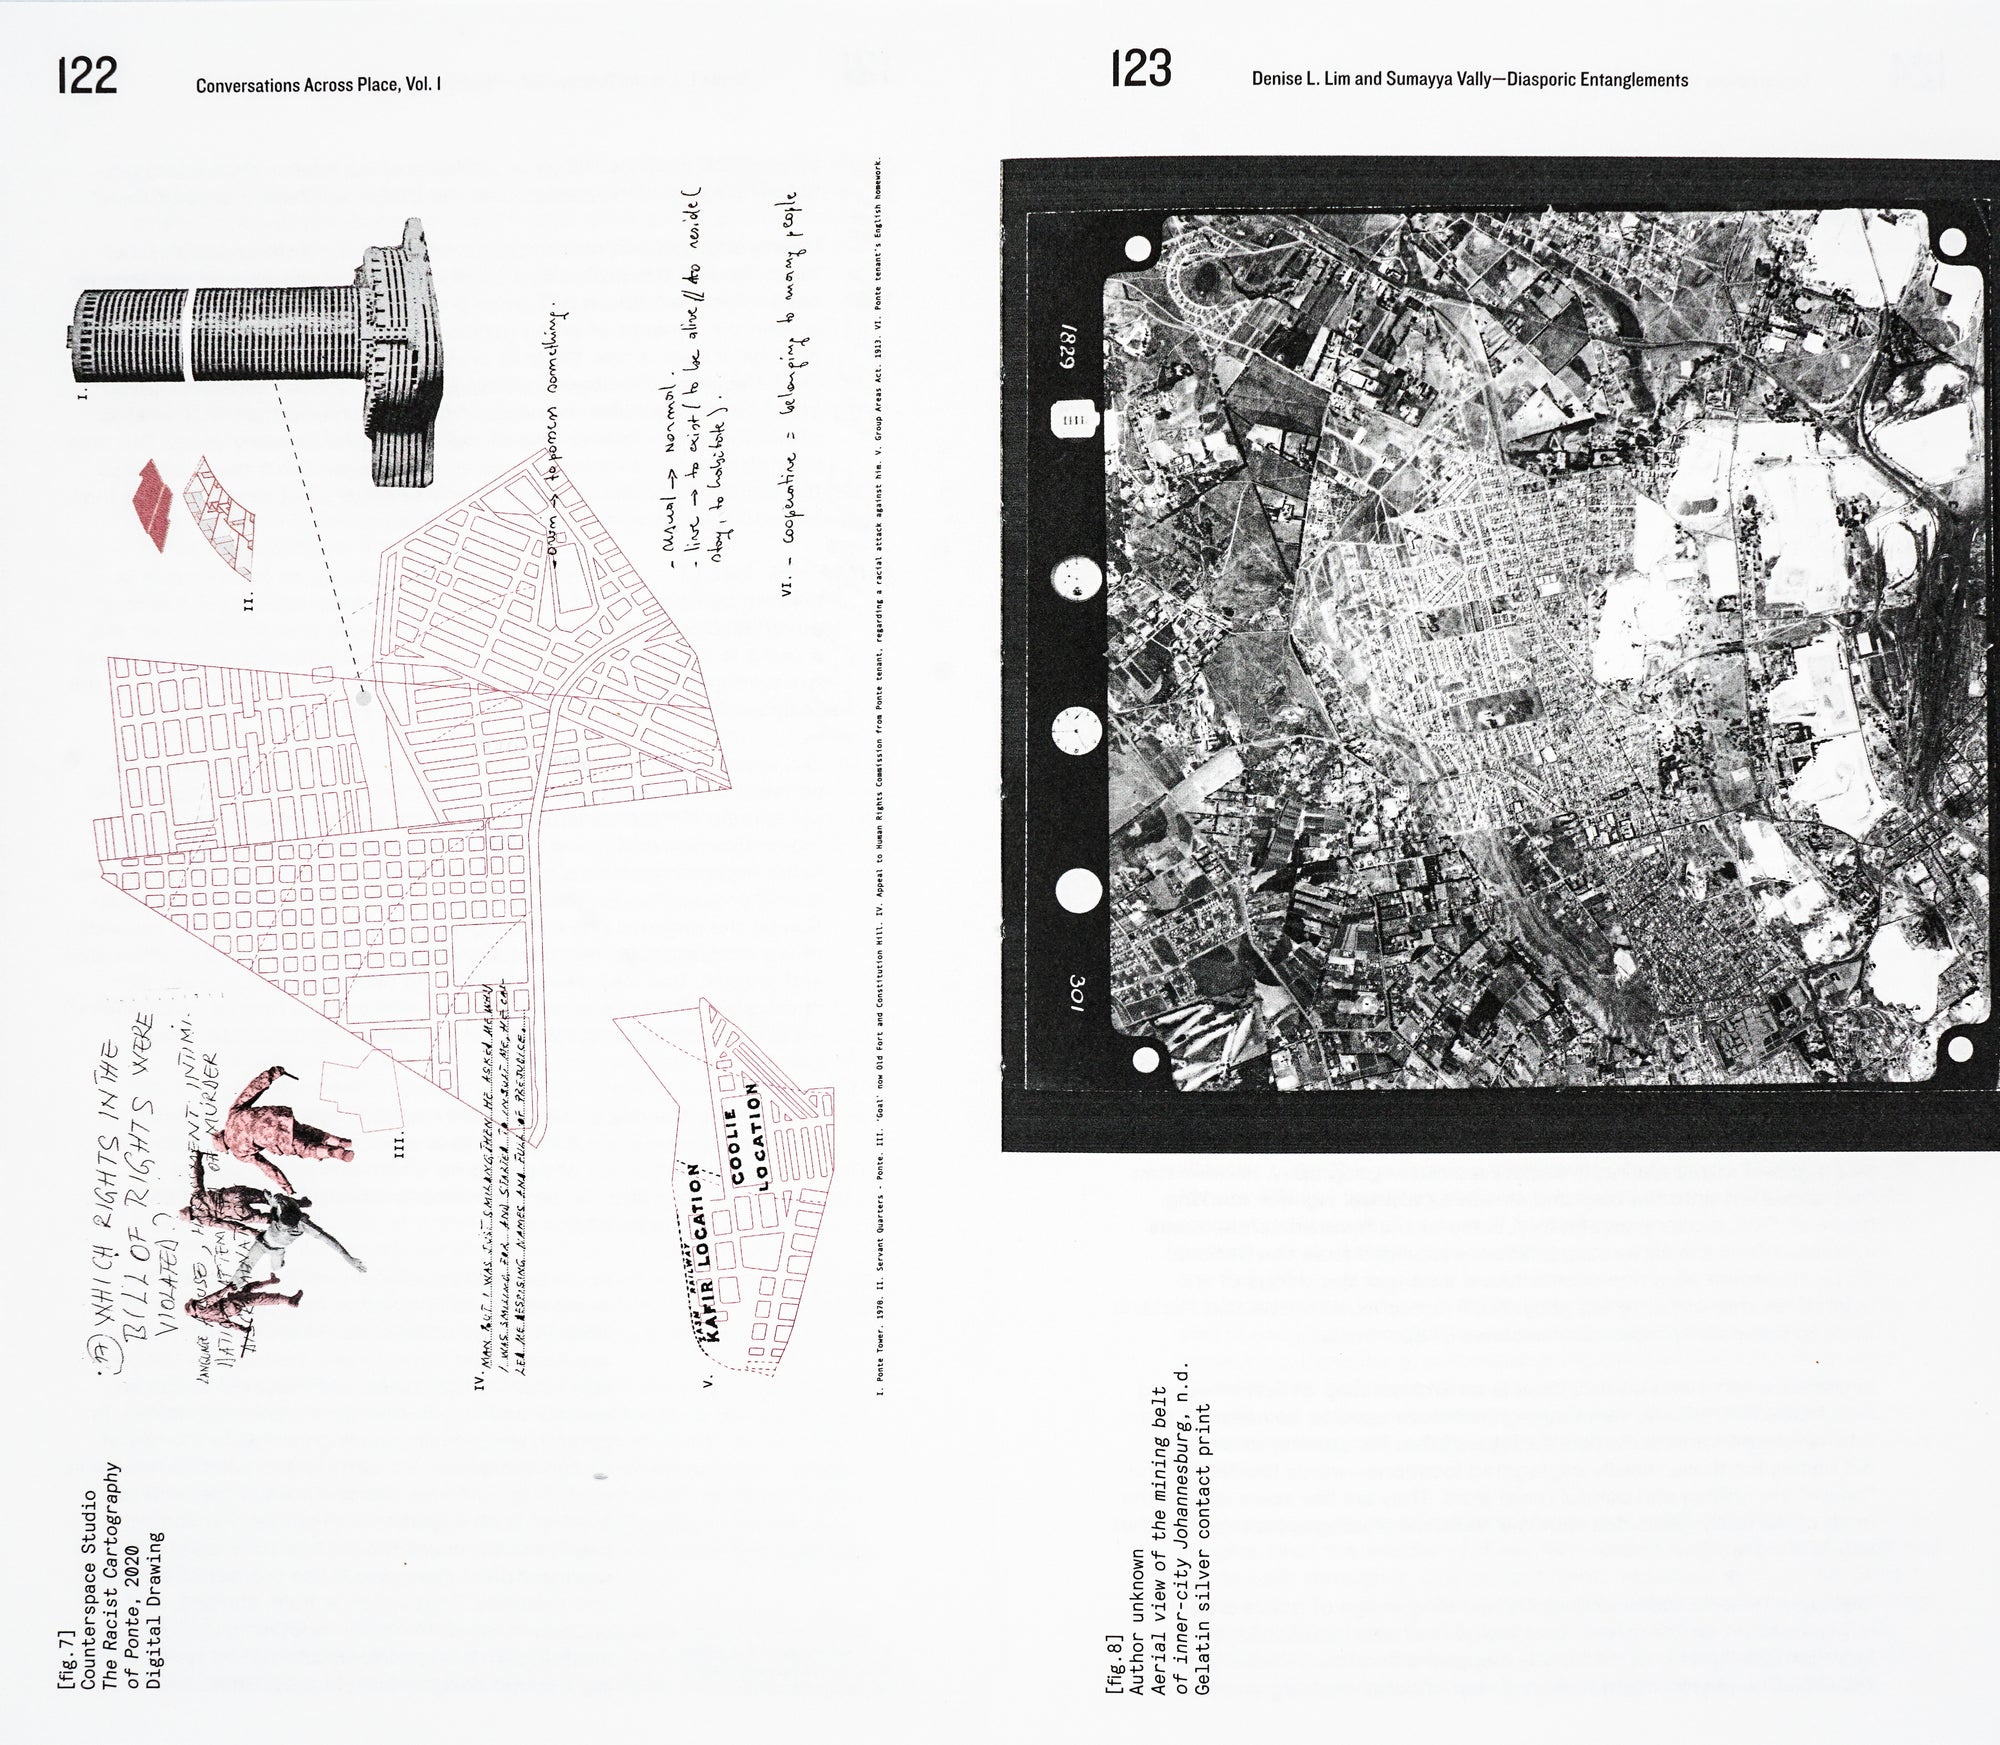 Book spread with white background, on the left page are abstract drawings and diagrams, the right page has a black and white aerial view of Johannesburg City.